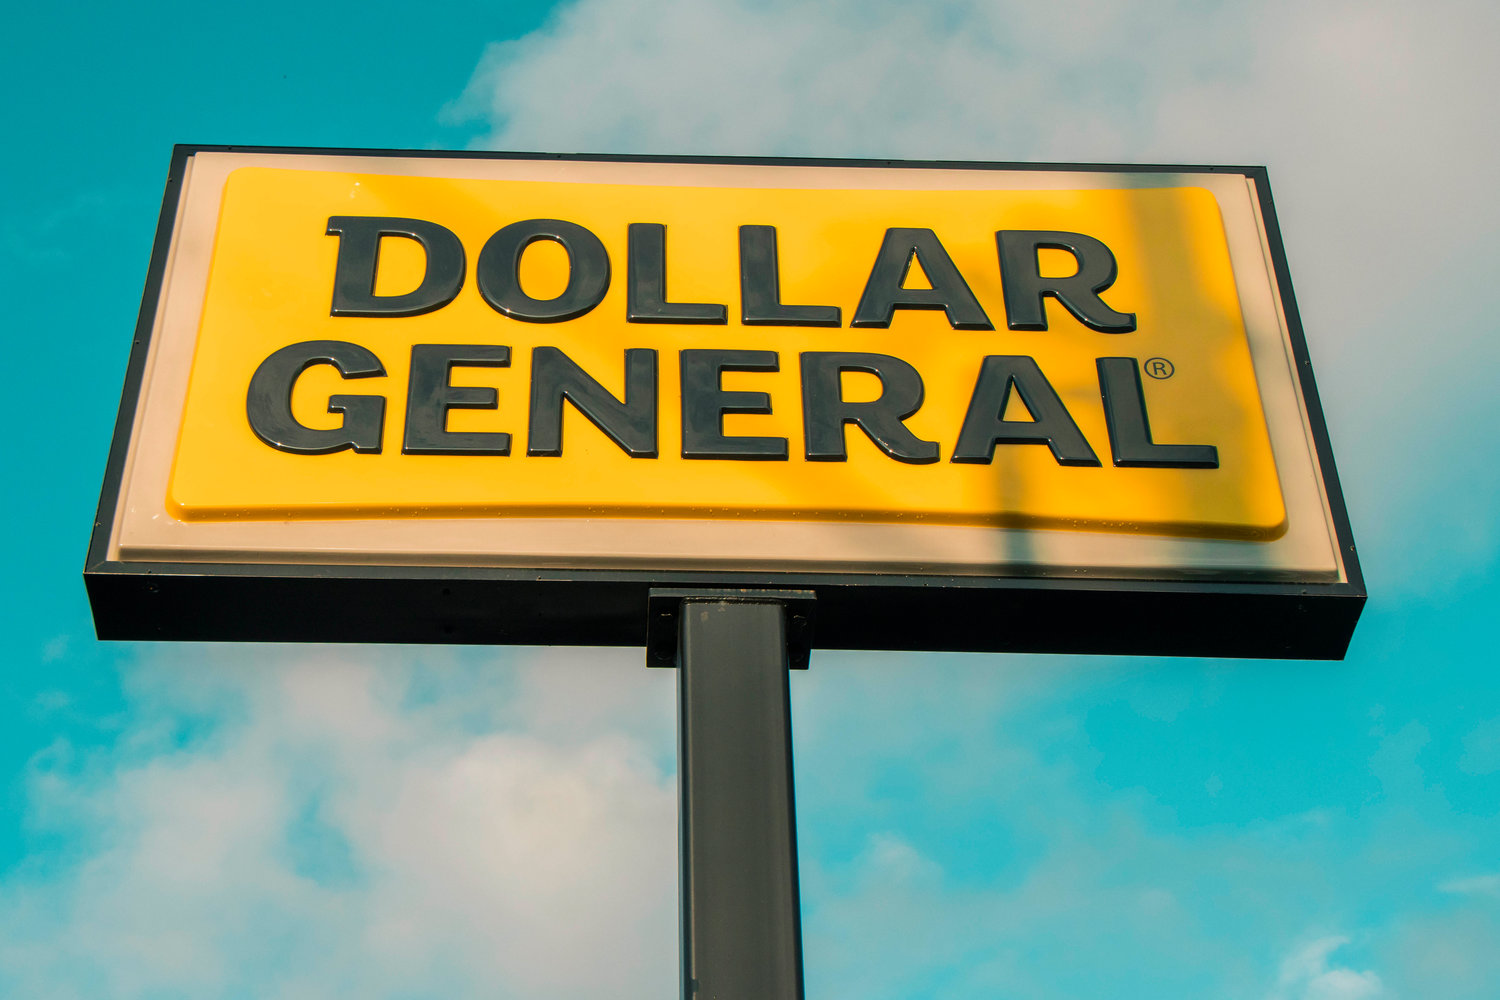 The last new Dollar General location in the Hub City is located at 416 W. Reynolds Ave. in Centralia.